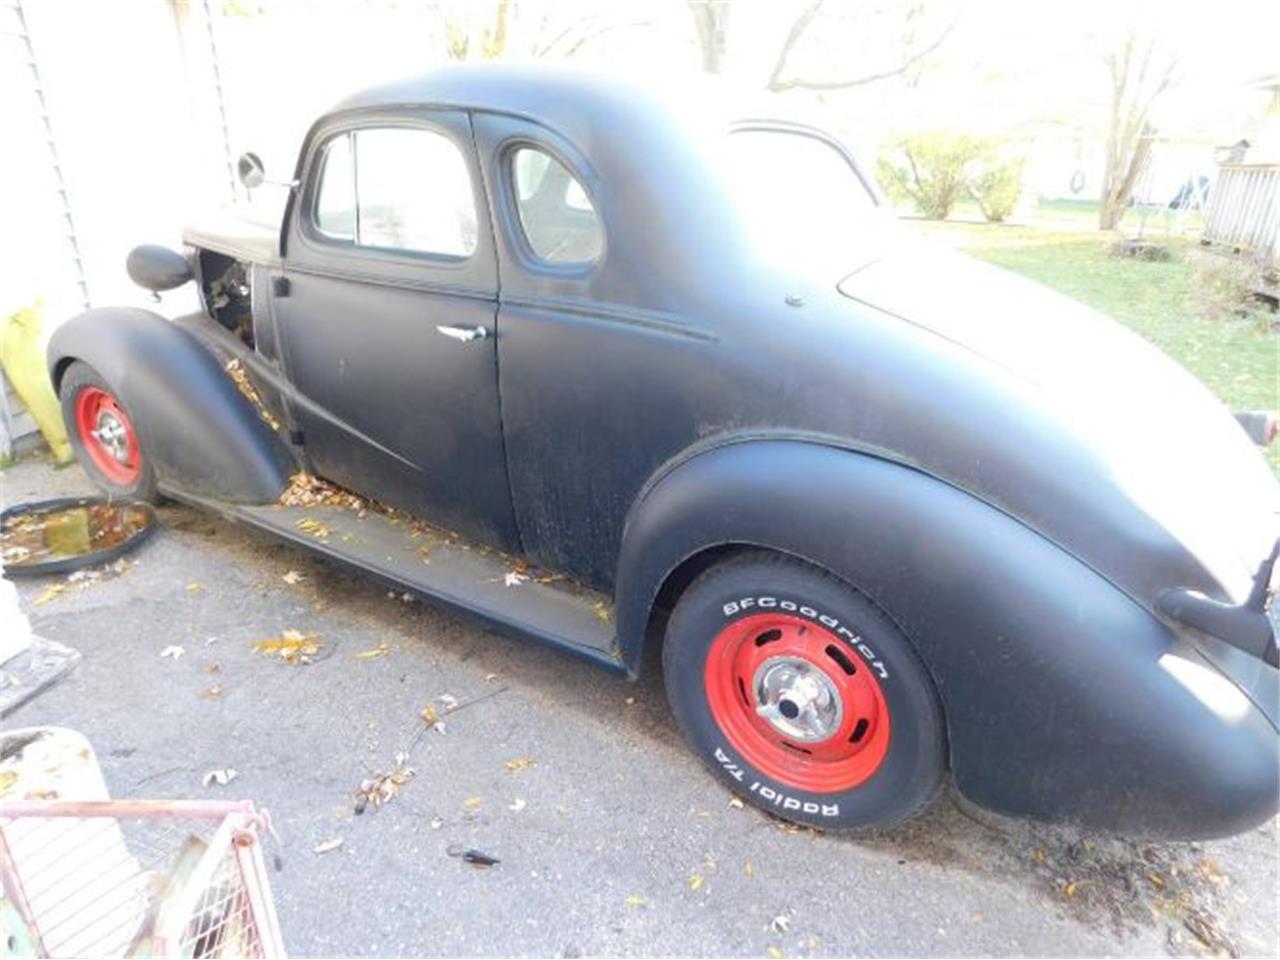 For Sale: 1938 Chevrolet Coupe in Cadillac, Michigan for sale in Cadillac, MI